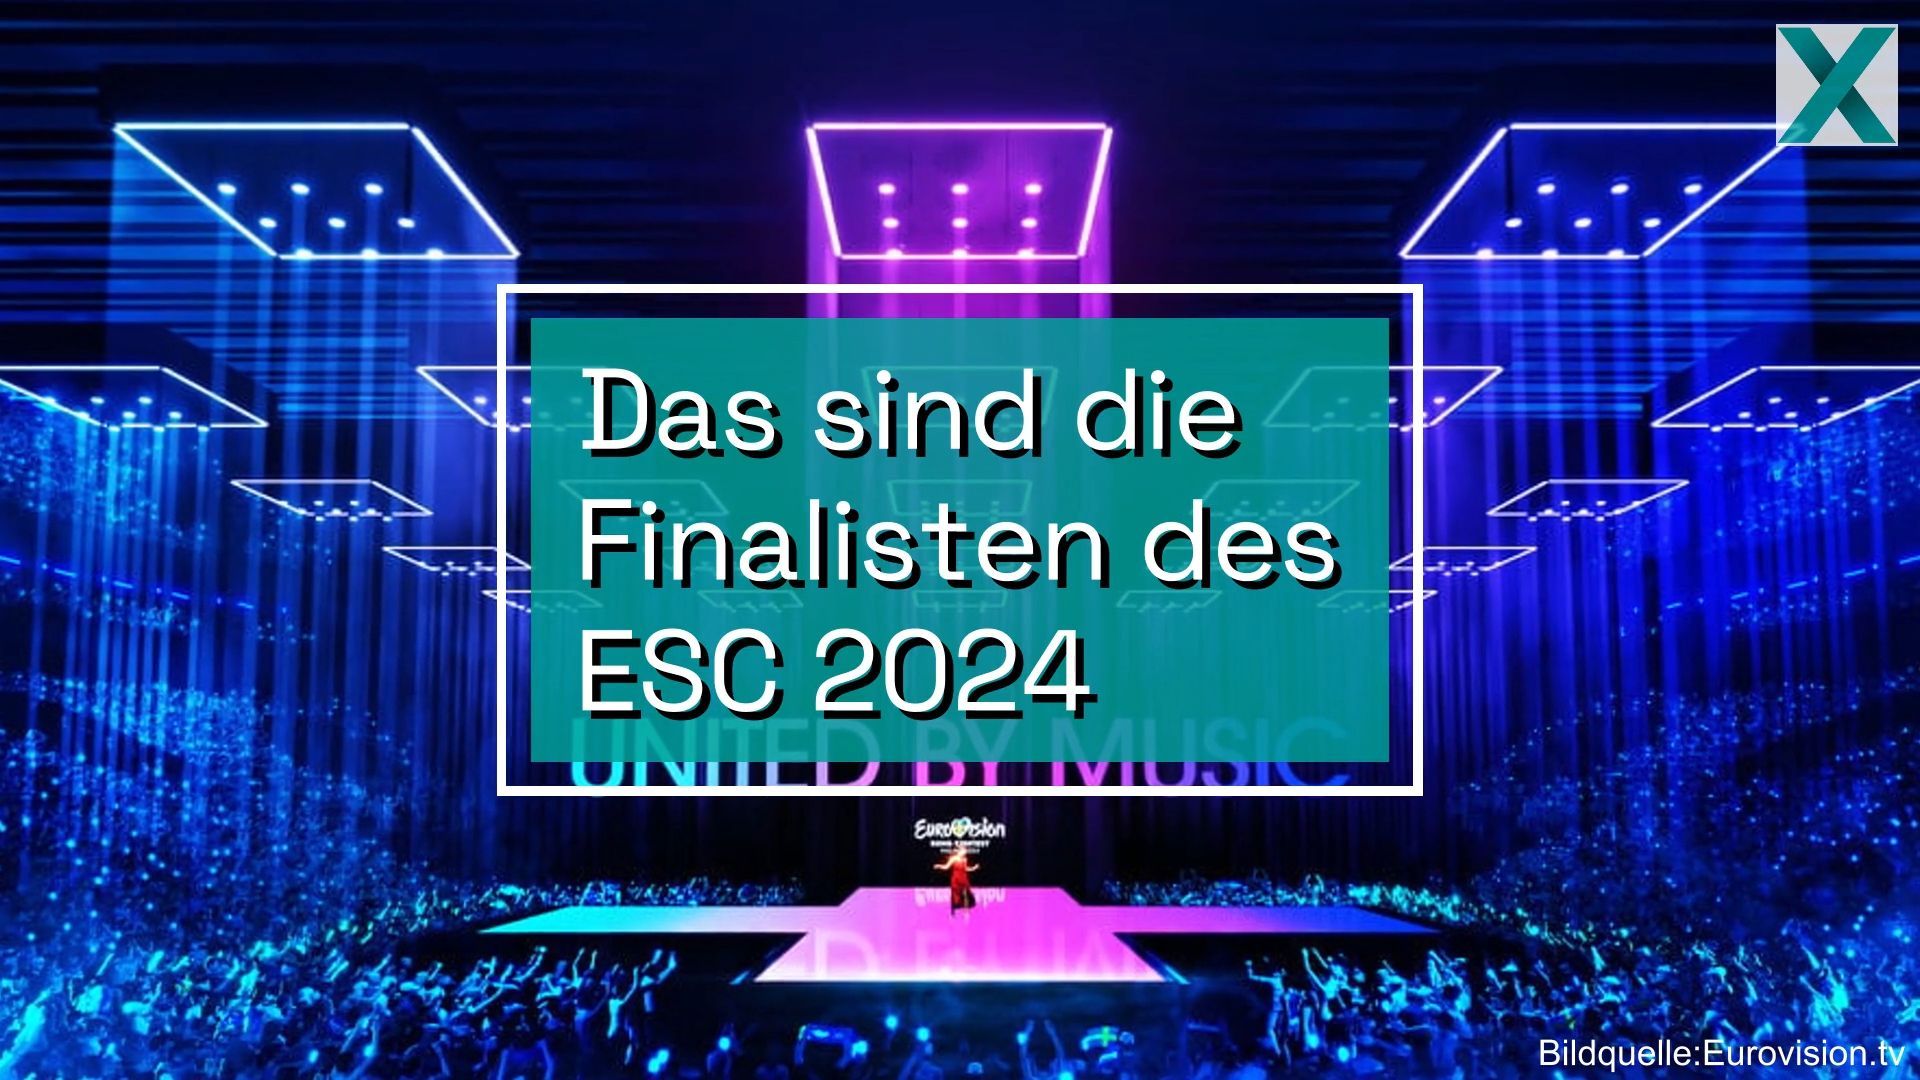 „Eurovision Song Contest 2024